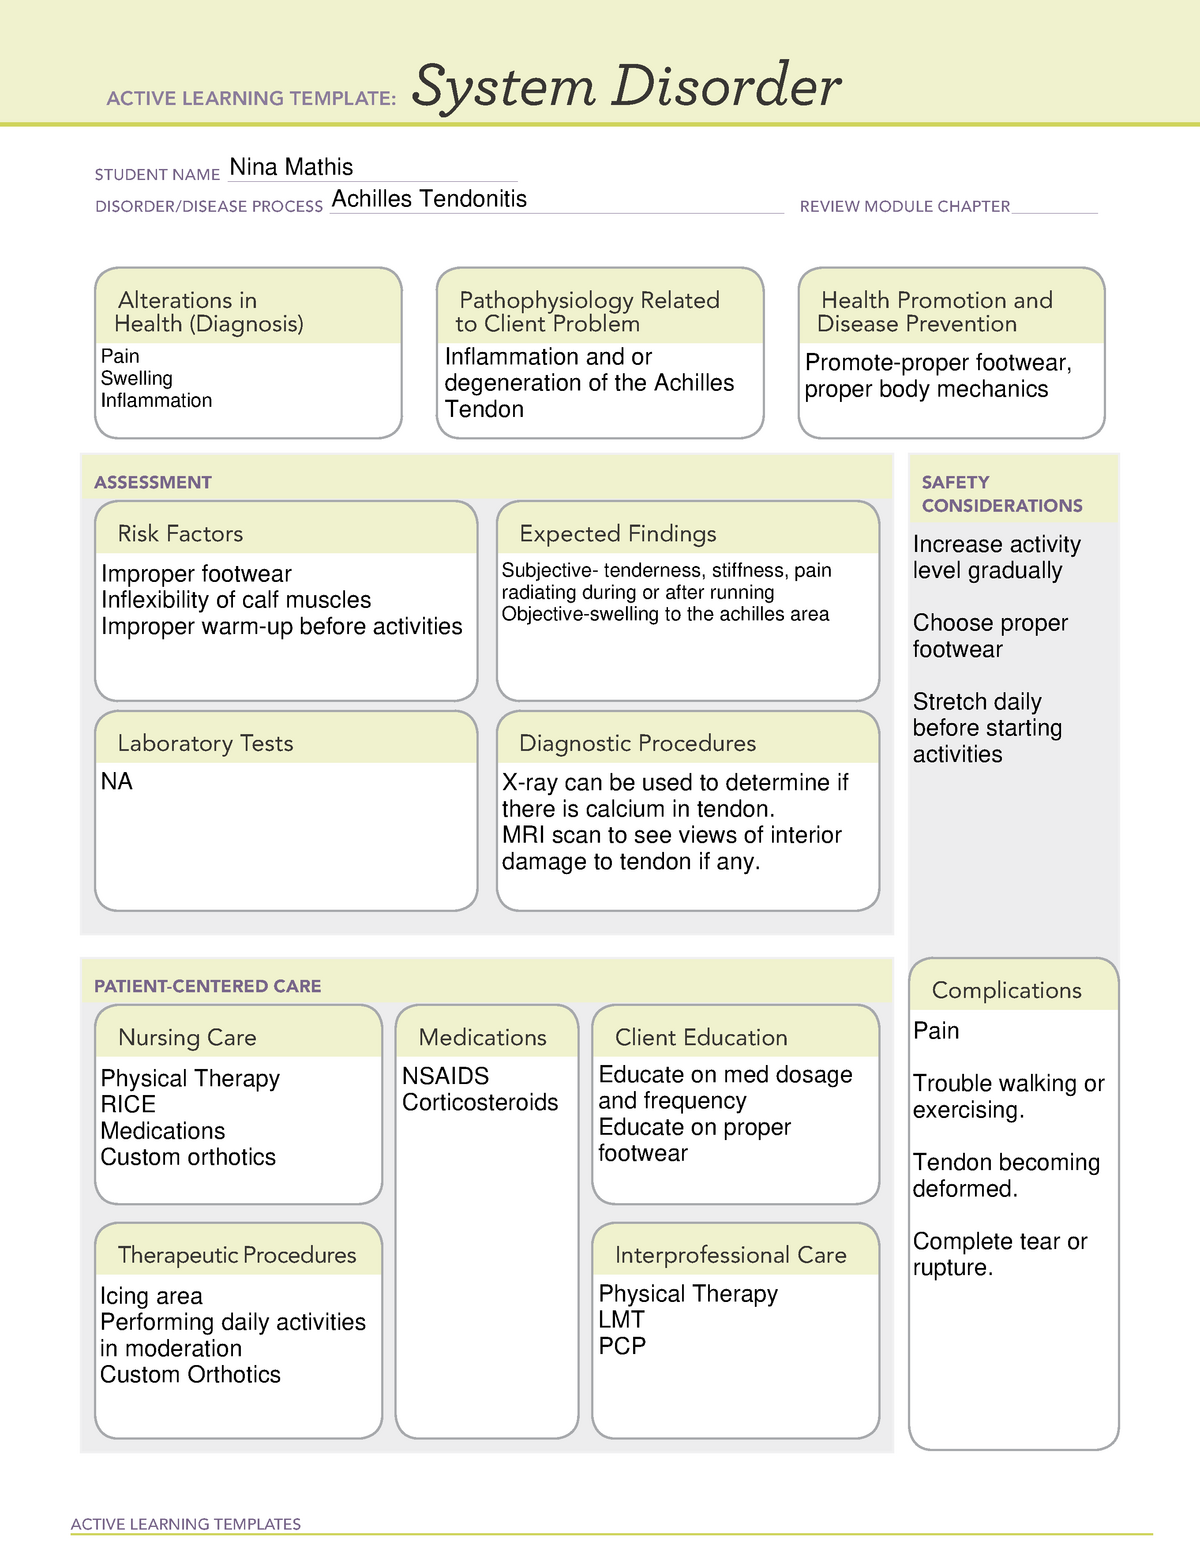 Ati Active Learning Template System Disorder systemdesign